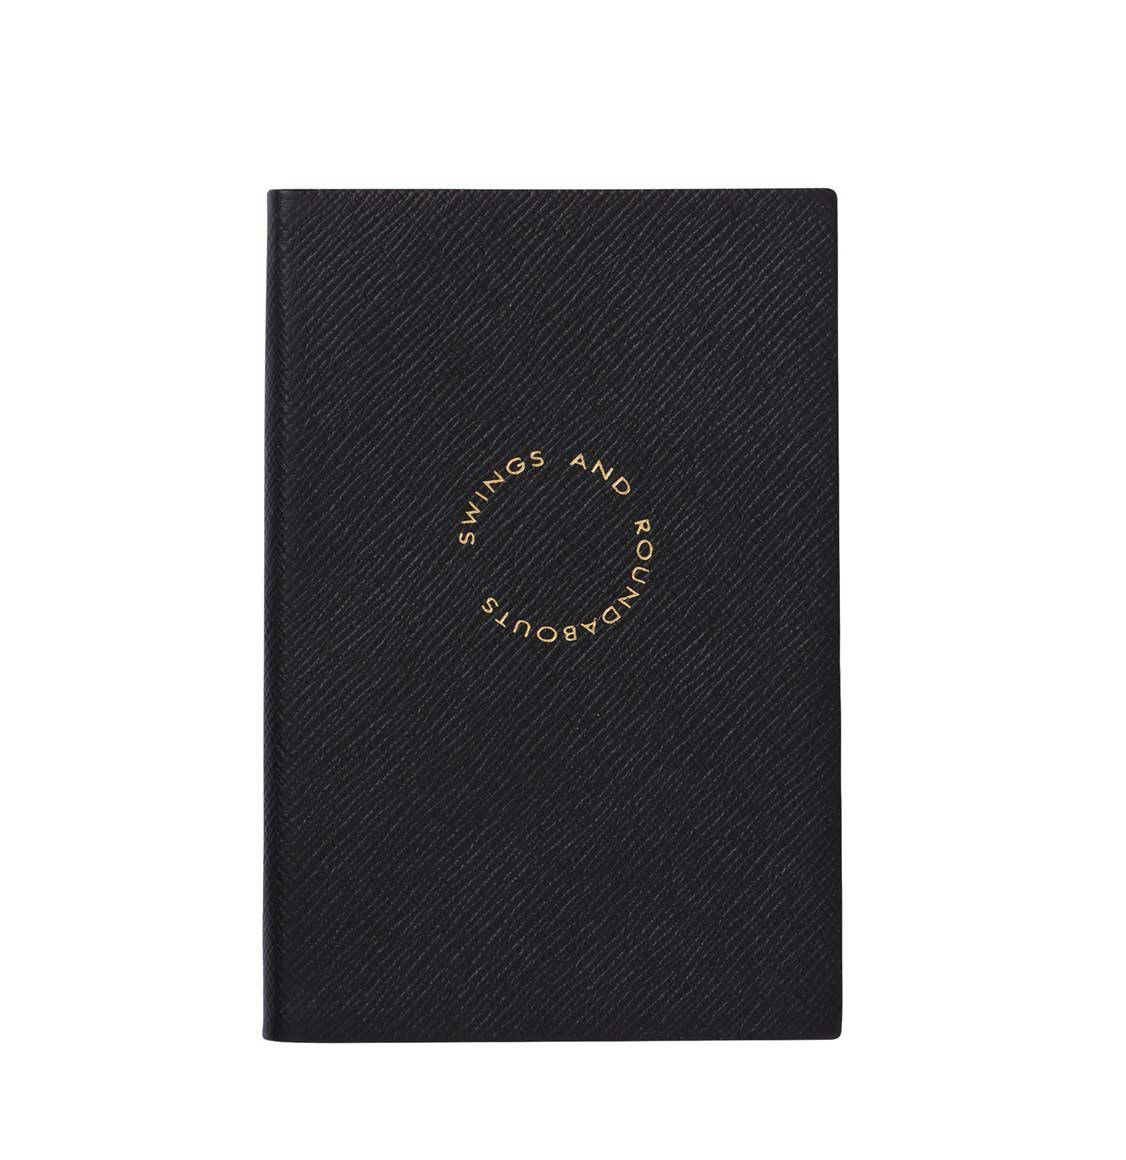 Smythson Swings and Roundabouts Notebook